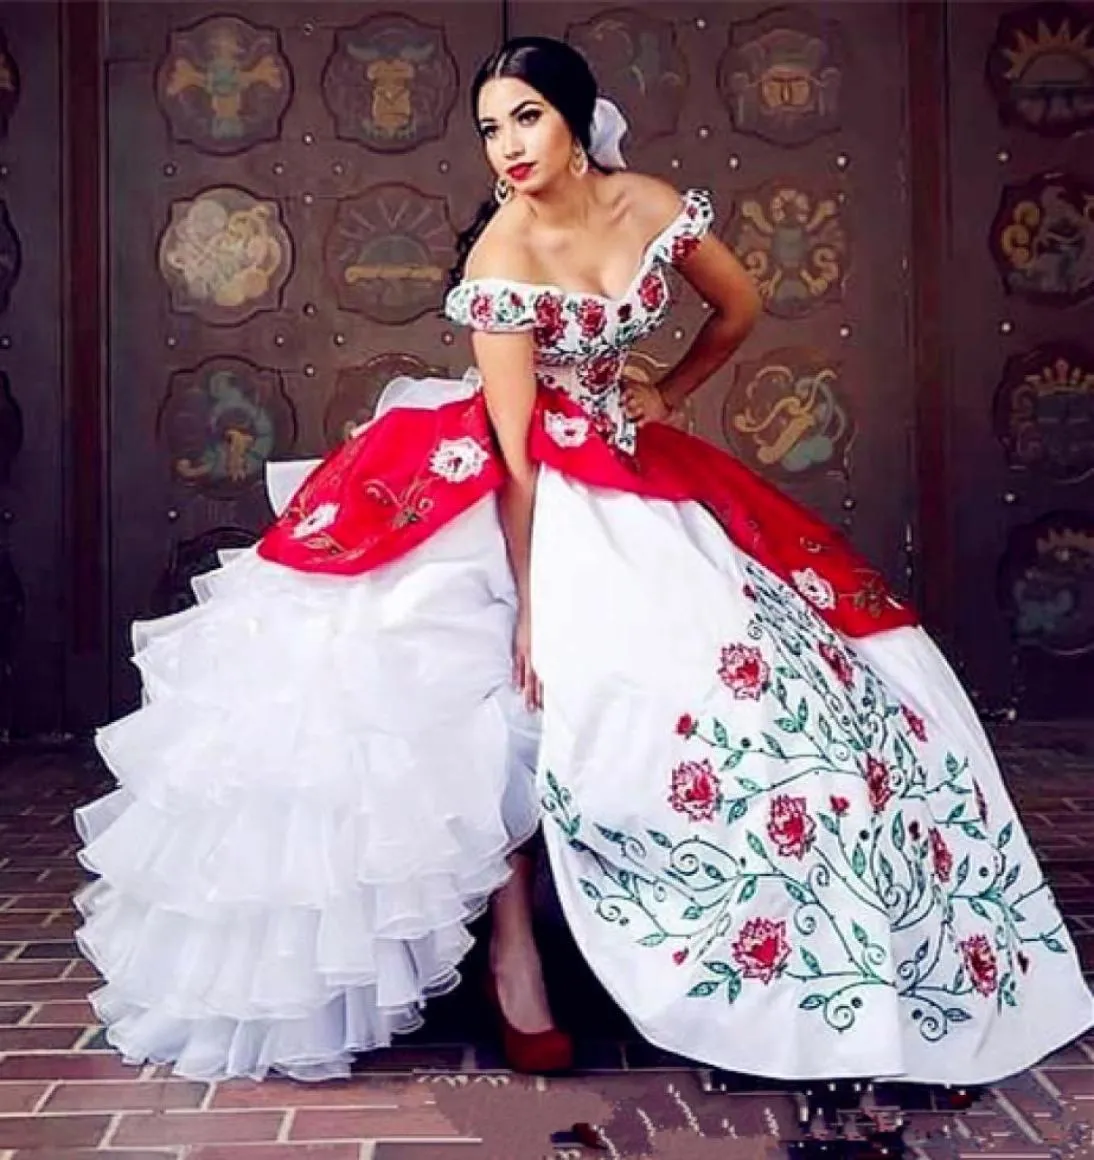 2019 Elegant New White And Red Vintage Quinceanera Dresses With Embroidery Beads Sweet 16 Prom Pageant Debutante Dress Party Gown 3278561